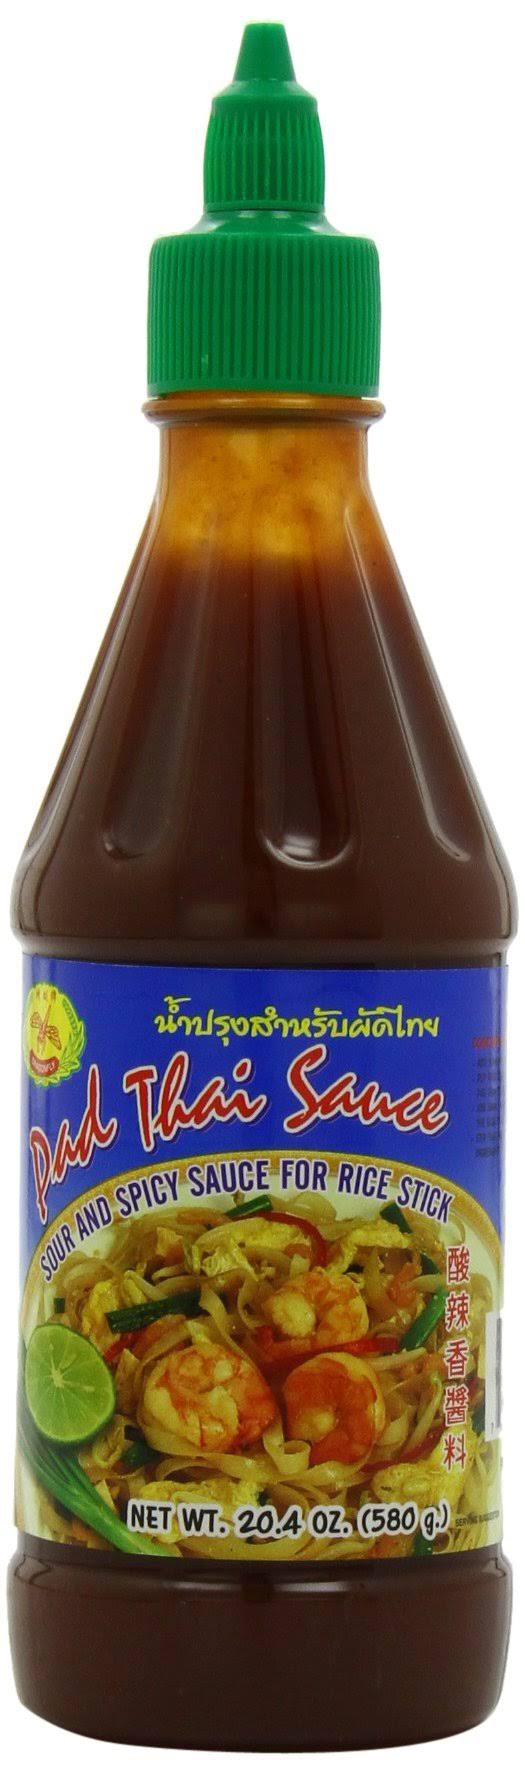 Dragonfly Pad Thai Sauce - 20.4oz, Pack of 4